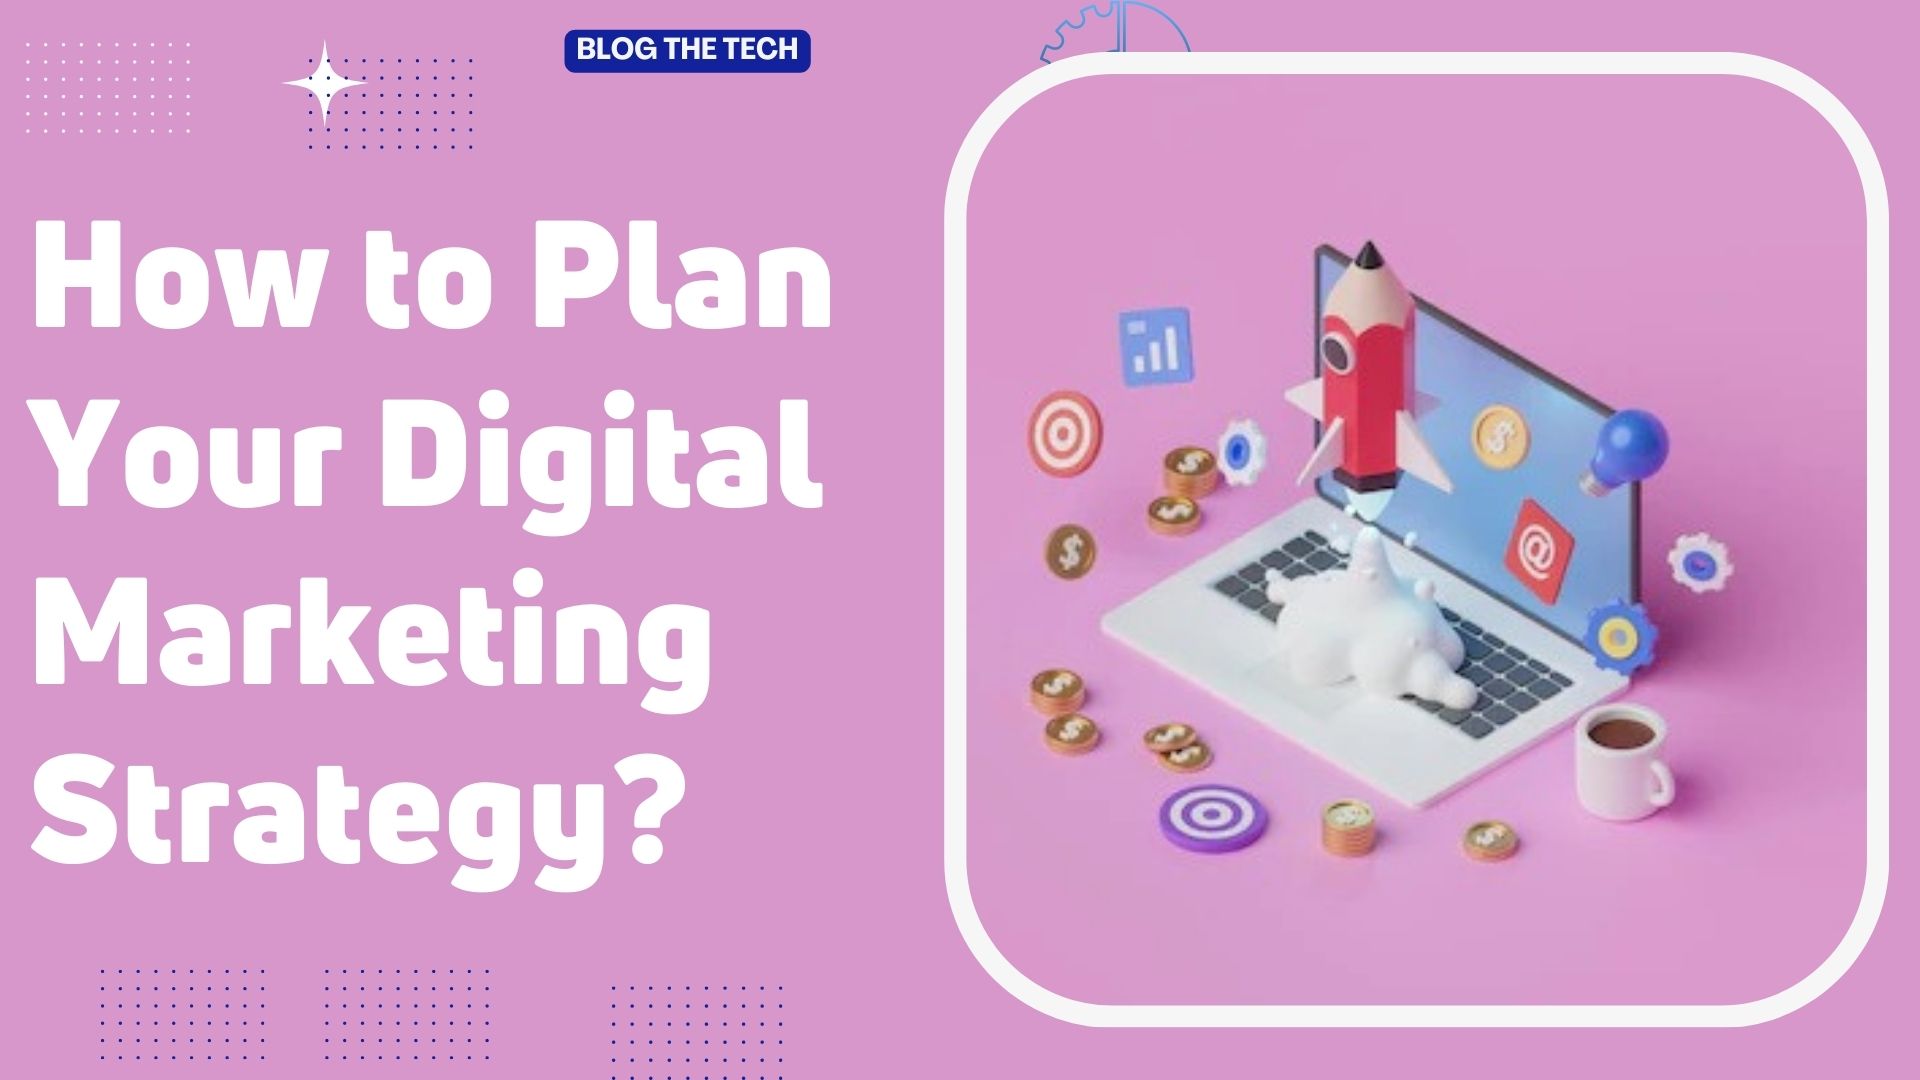 How to Plan Your Digital Marketing Strategy?